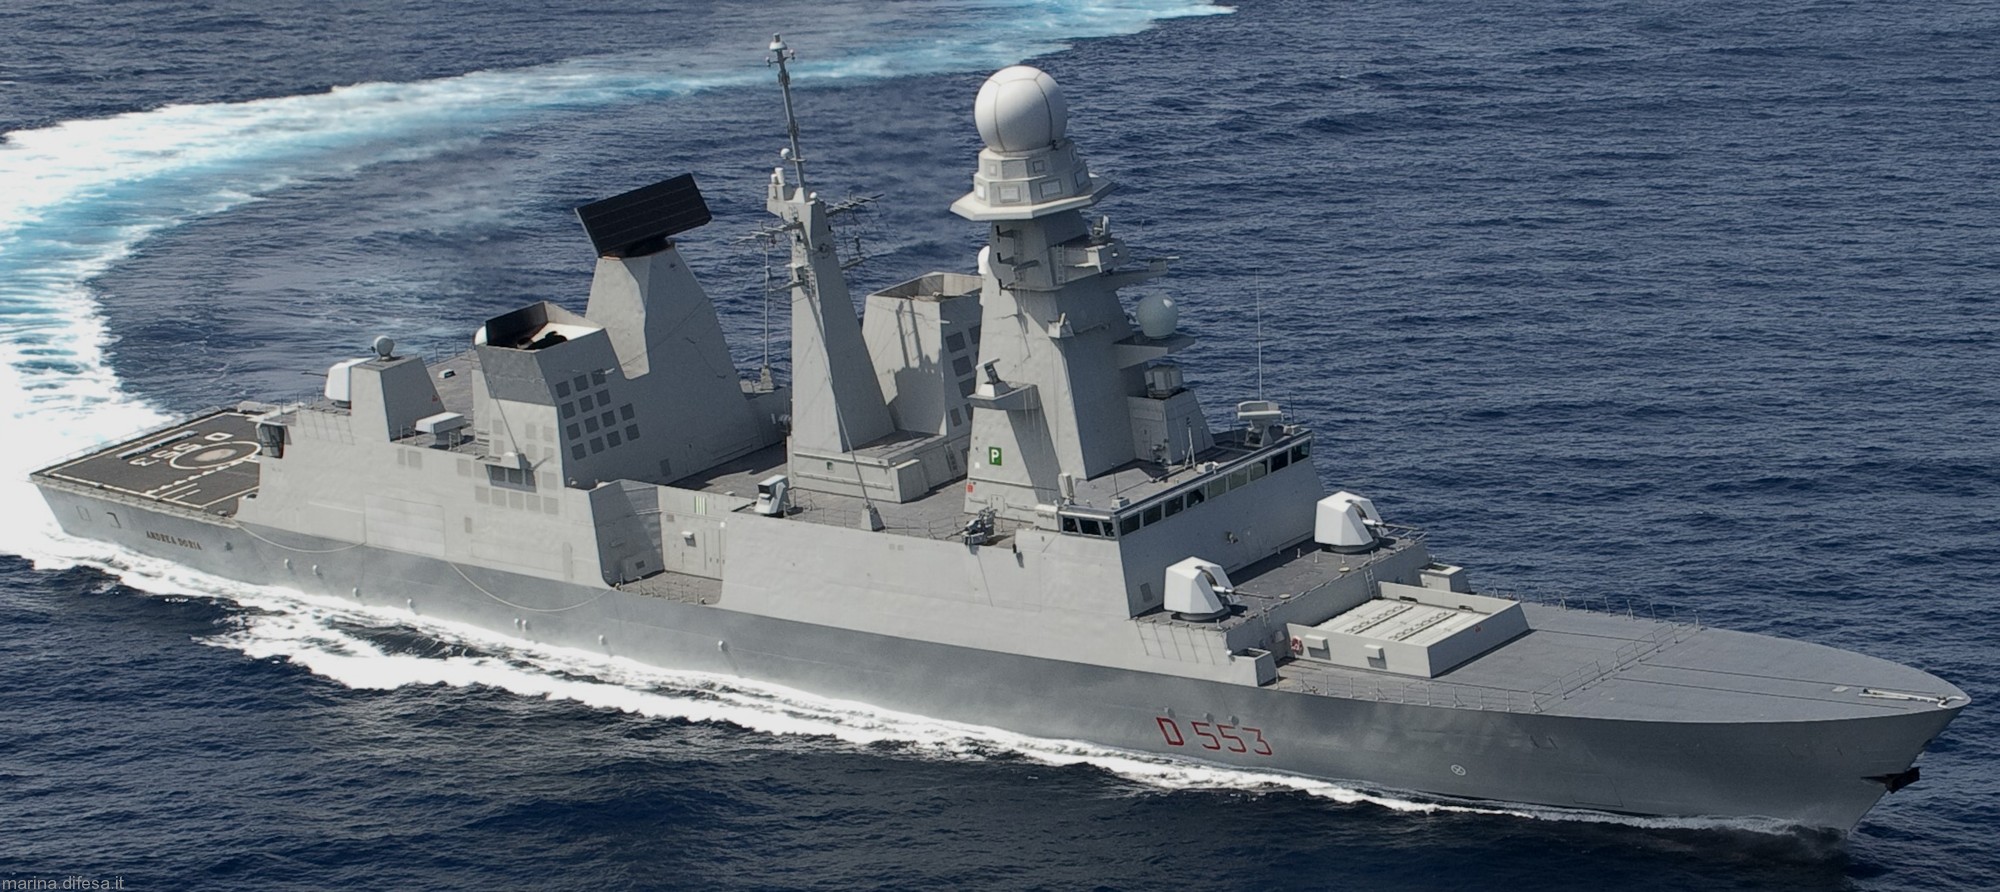 d-553 its andrea doria guided missile destroyer ddgh horizon class italian navy 09